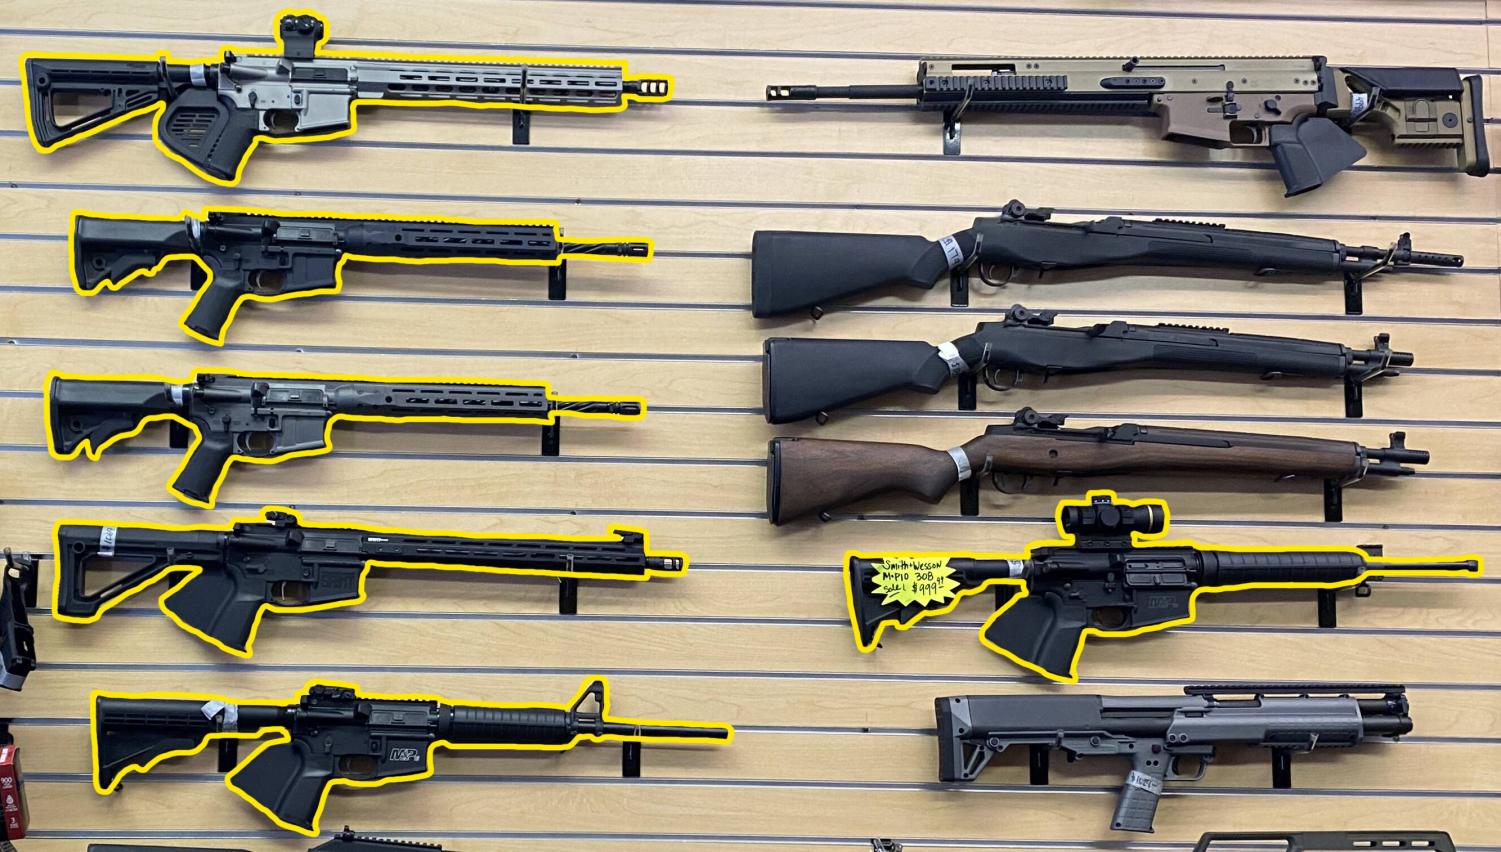 Consumer AR-15 rifles on sale at a bay area gun store.